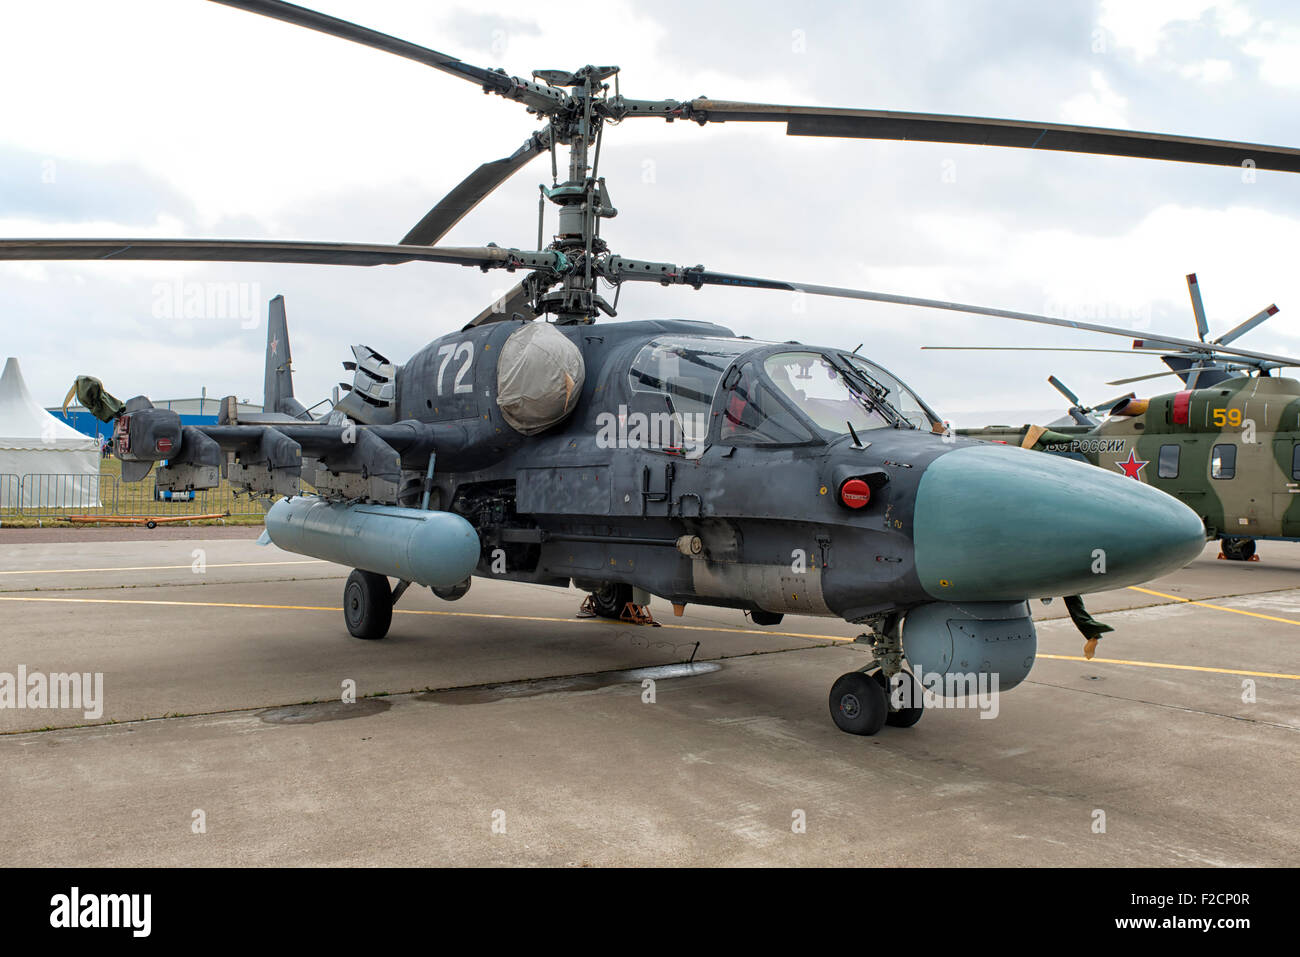 KA-52 Alligator Helicopter  at MAKS 2015 Air Show in Moscow, Russia Stock Photo